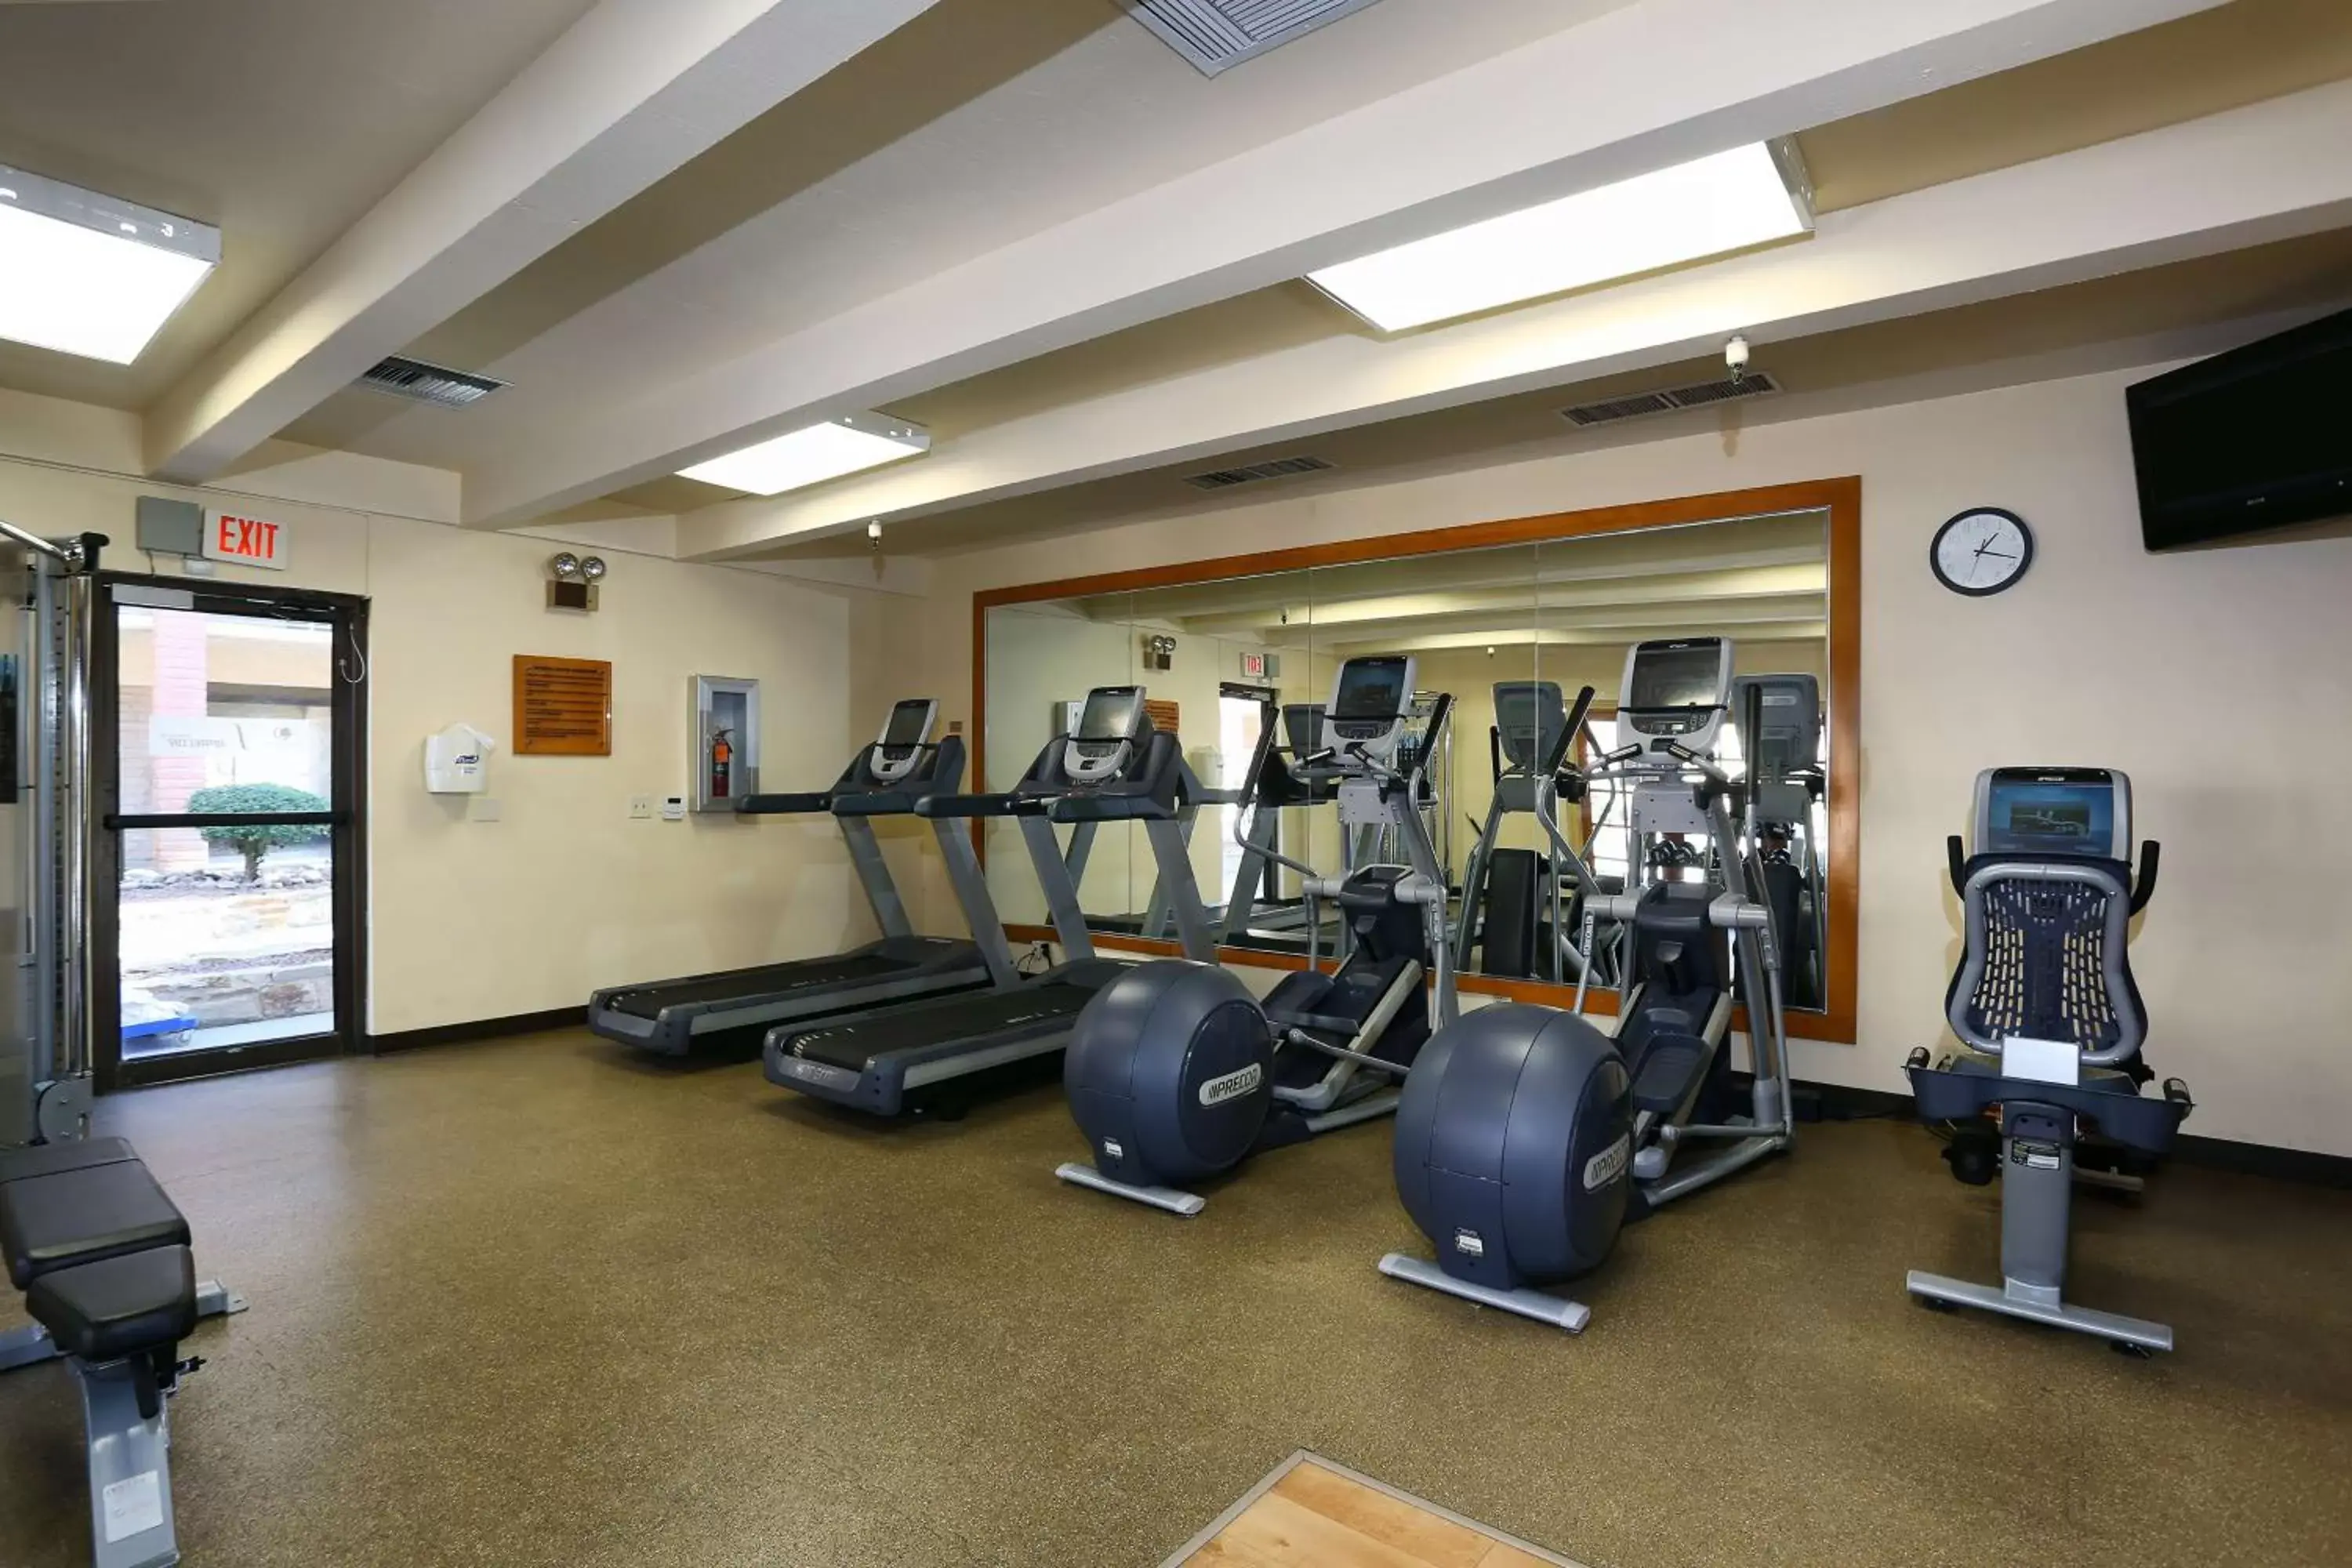 Fitness centre/facilities, Fitness Center/Facilities in DoubleTree Suites by Hilton Tucson Airport